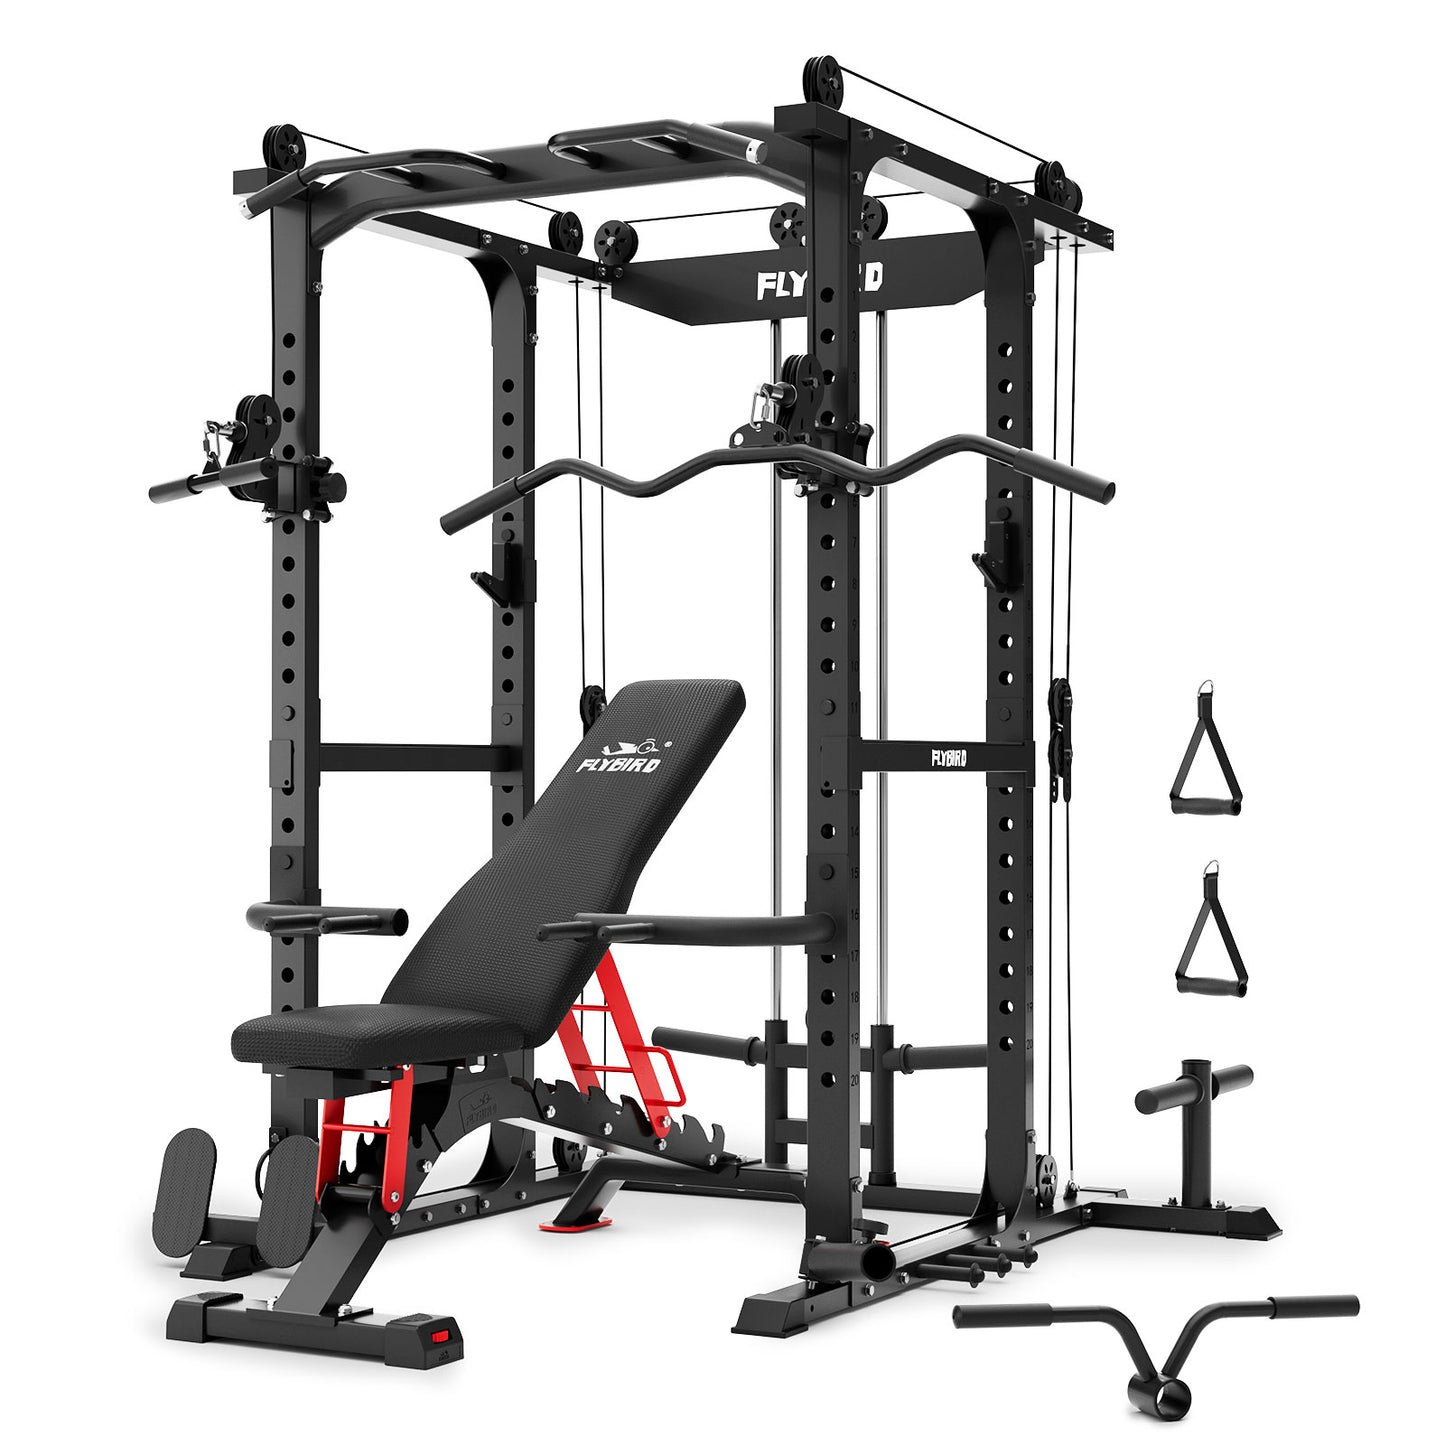 Flybird All-In-One Power Rack with Pulley System